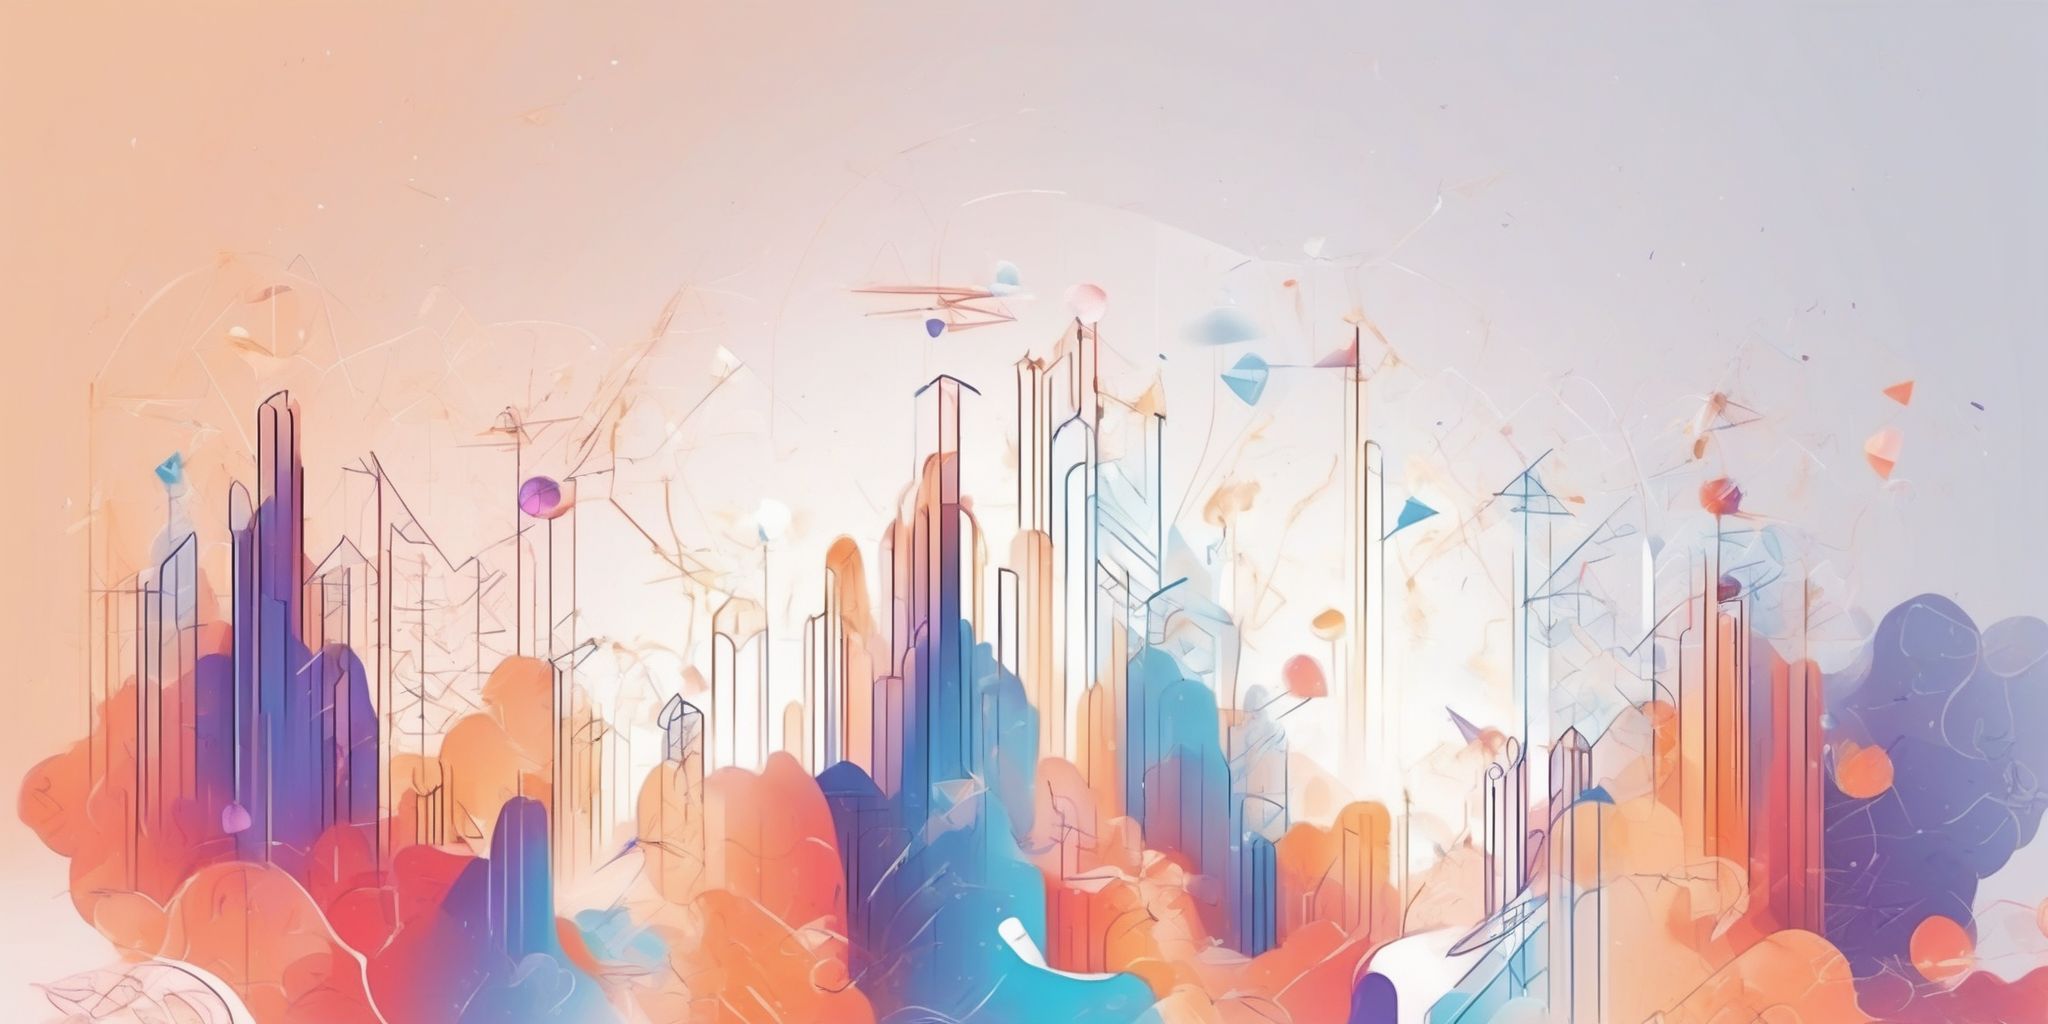 Success catalyst in illustration style with gradients and white background